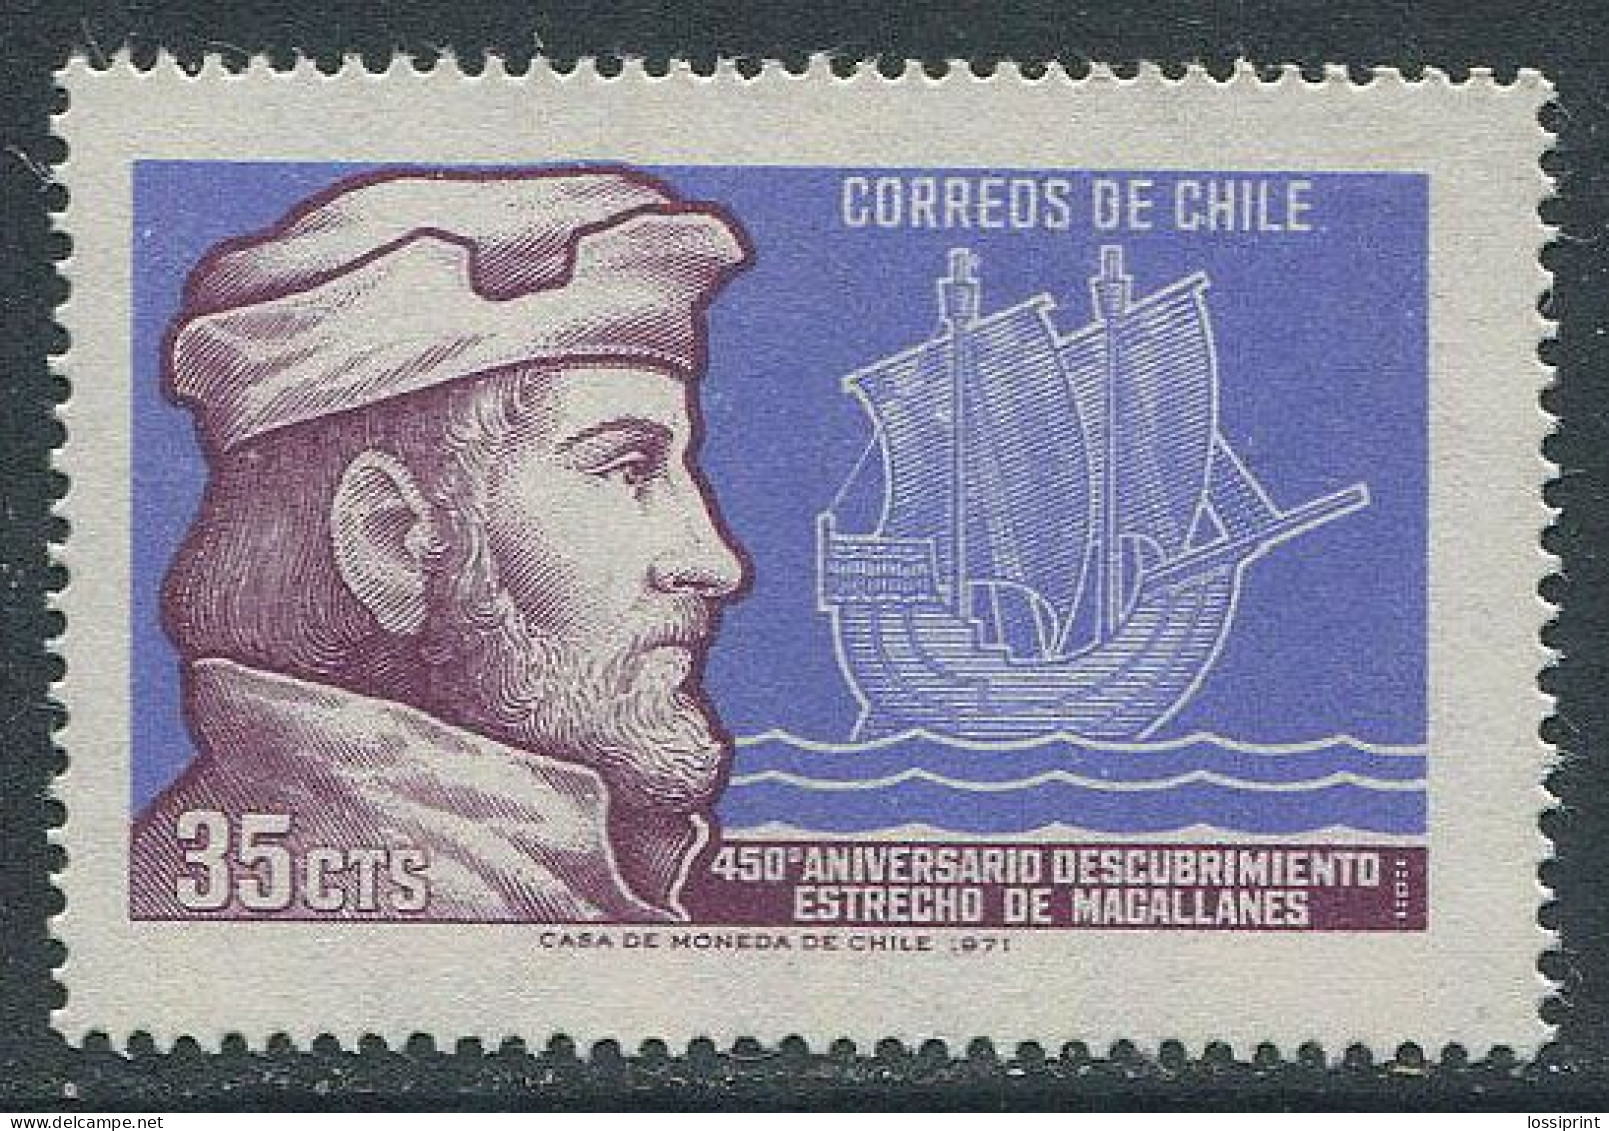 Chile:Unused Stamp 450 Years From Magalhaes Exhibition, Sailing Ship, Old Ship, 1971, MNH - Ships